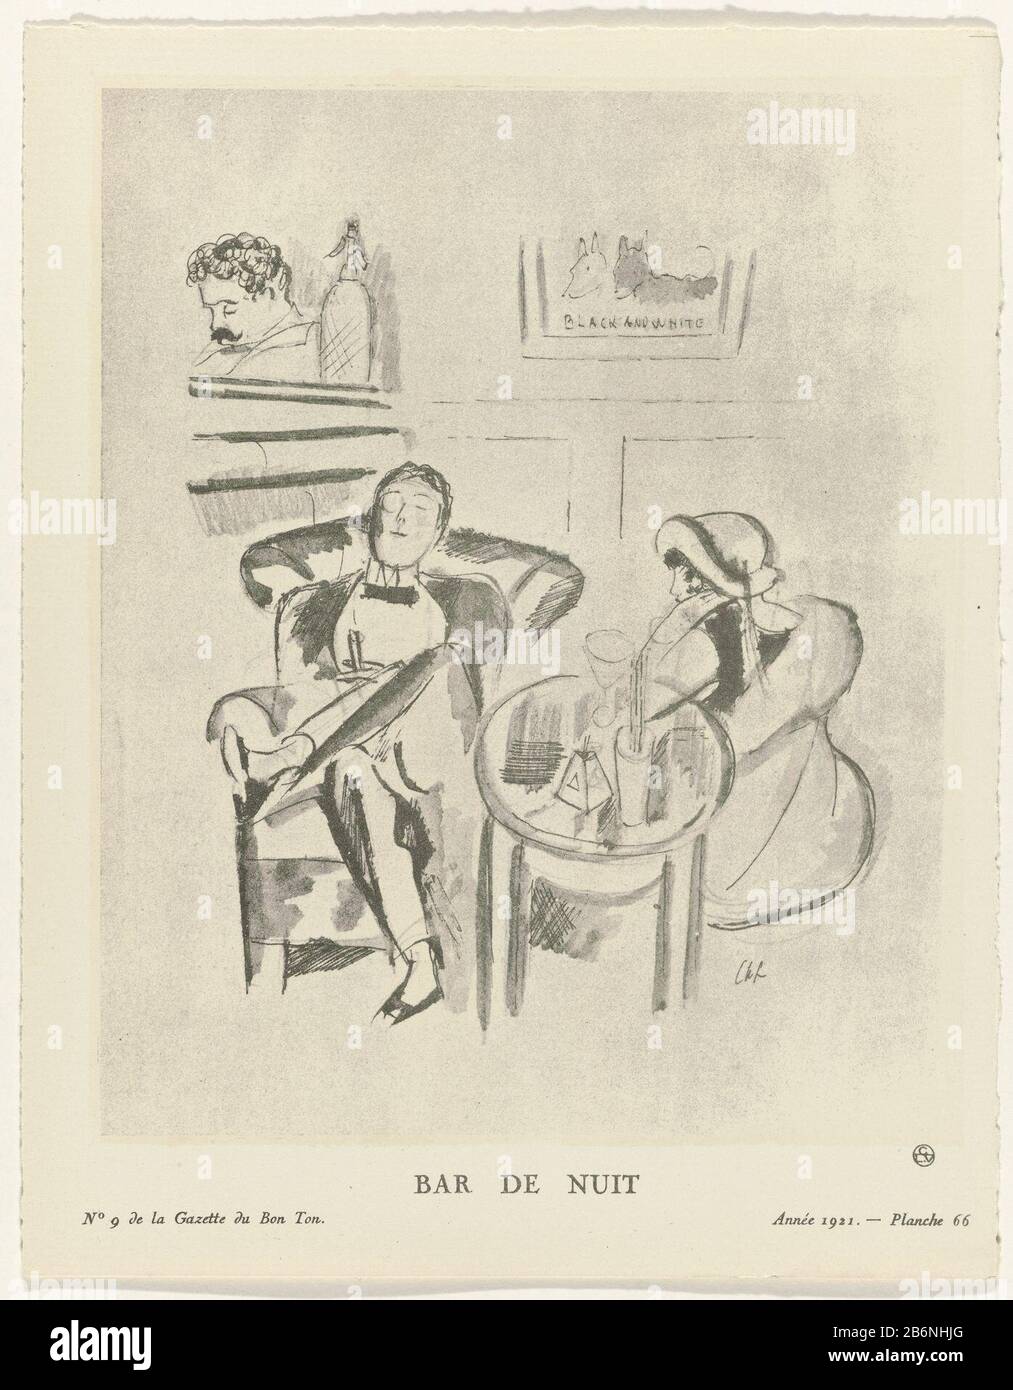 Gazette du Bon Ton, 1921 - No 9, Pl 66 Bar de nuit (titel op object) Man.  sitting with the legs about each other, in a tuxedo. Cigar in hand. In  addition